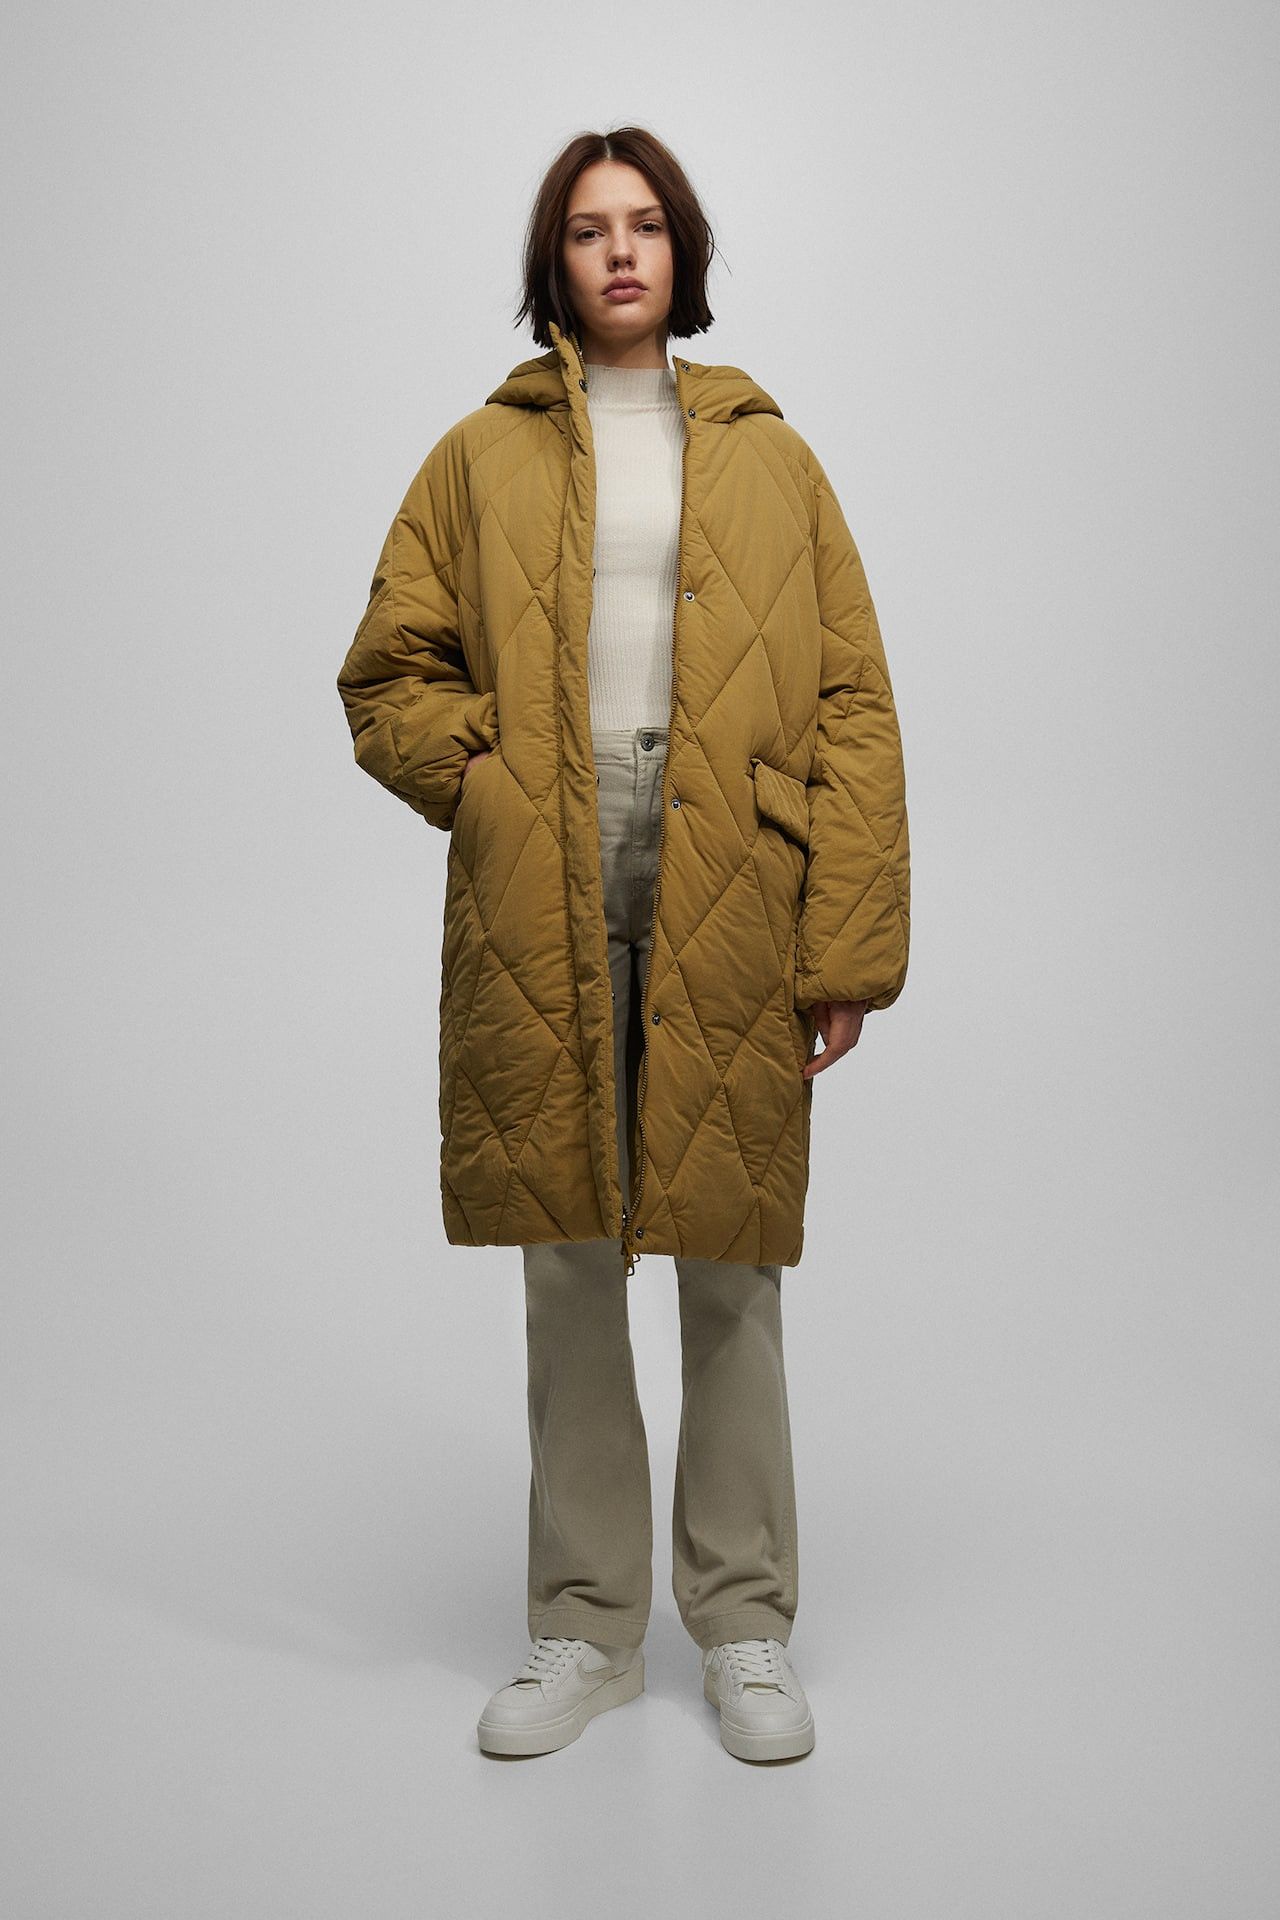 Long quilted coat | Long Puffer Coat | Winter Coat Outfit | Winter Outfit Inspo | PULL and BEAR UK